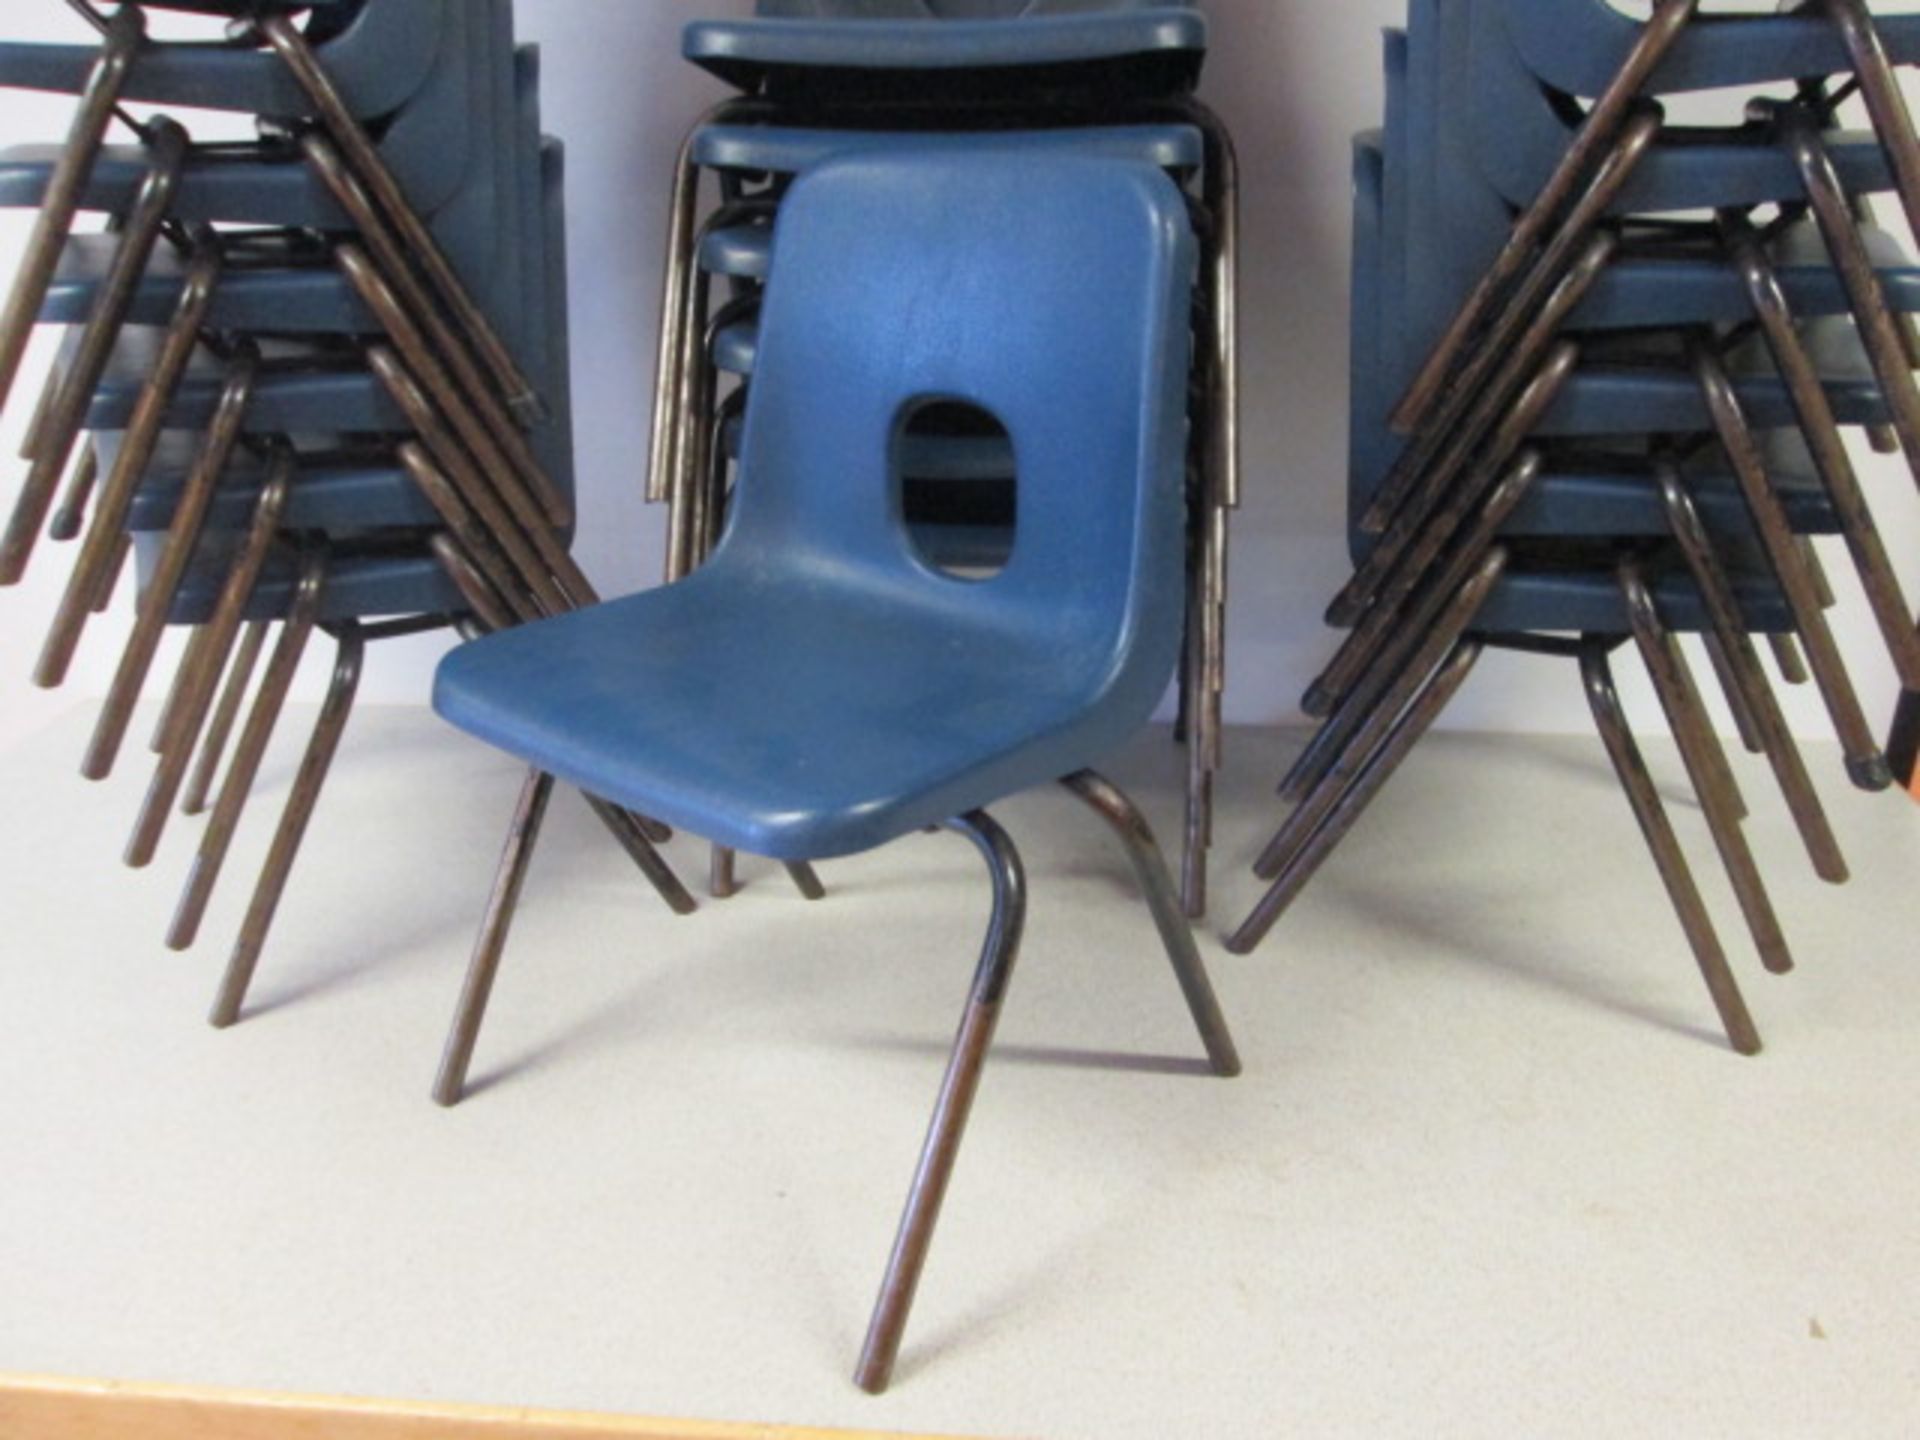 21 x Hille Series E Overall, Children's Classroom Stacking Chairs in Blue. Size (H) 50cm x (W) - Image 2 of 3